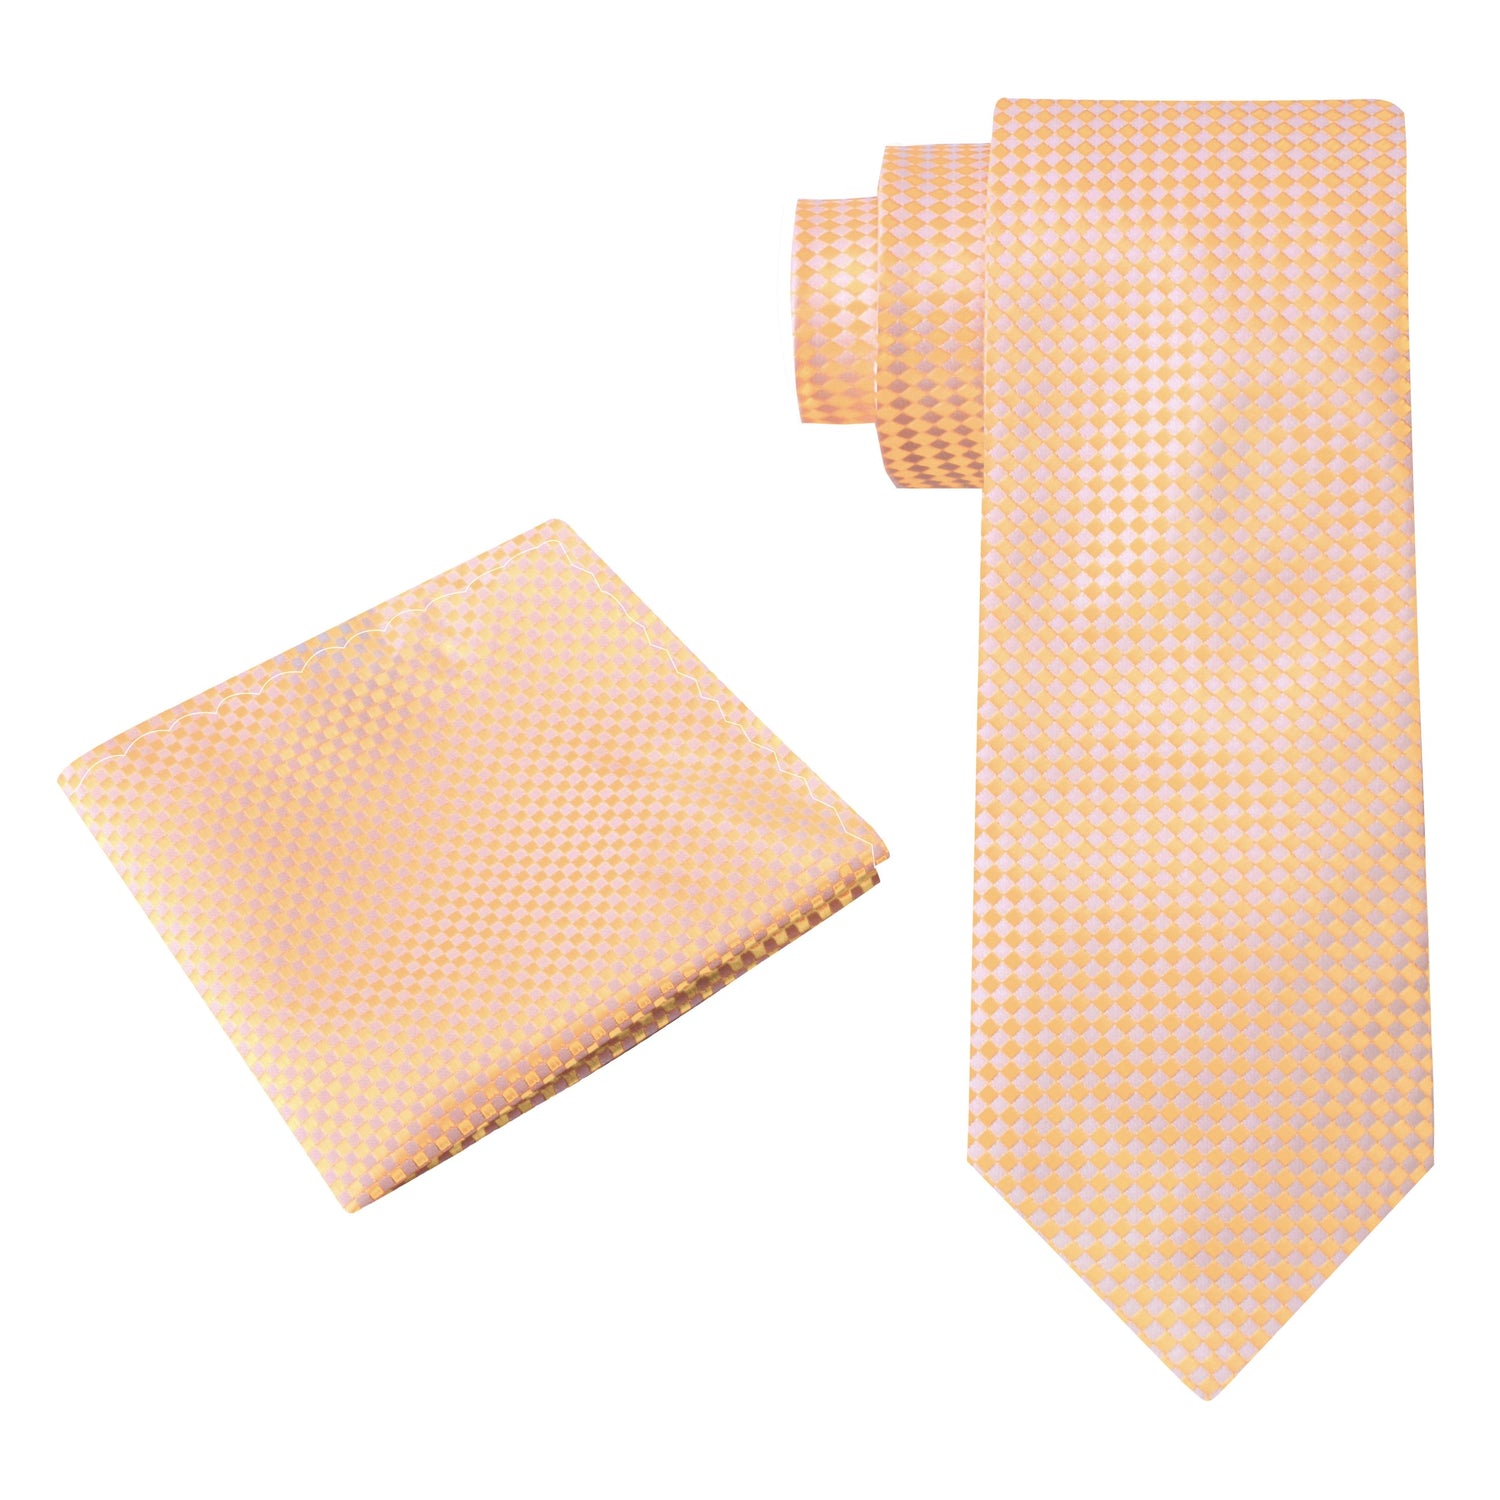 Alt View; Yellow Gold Geometric Tie and Square